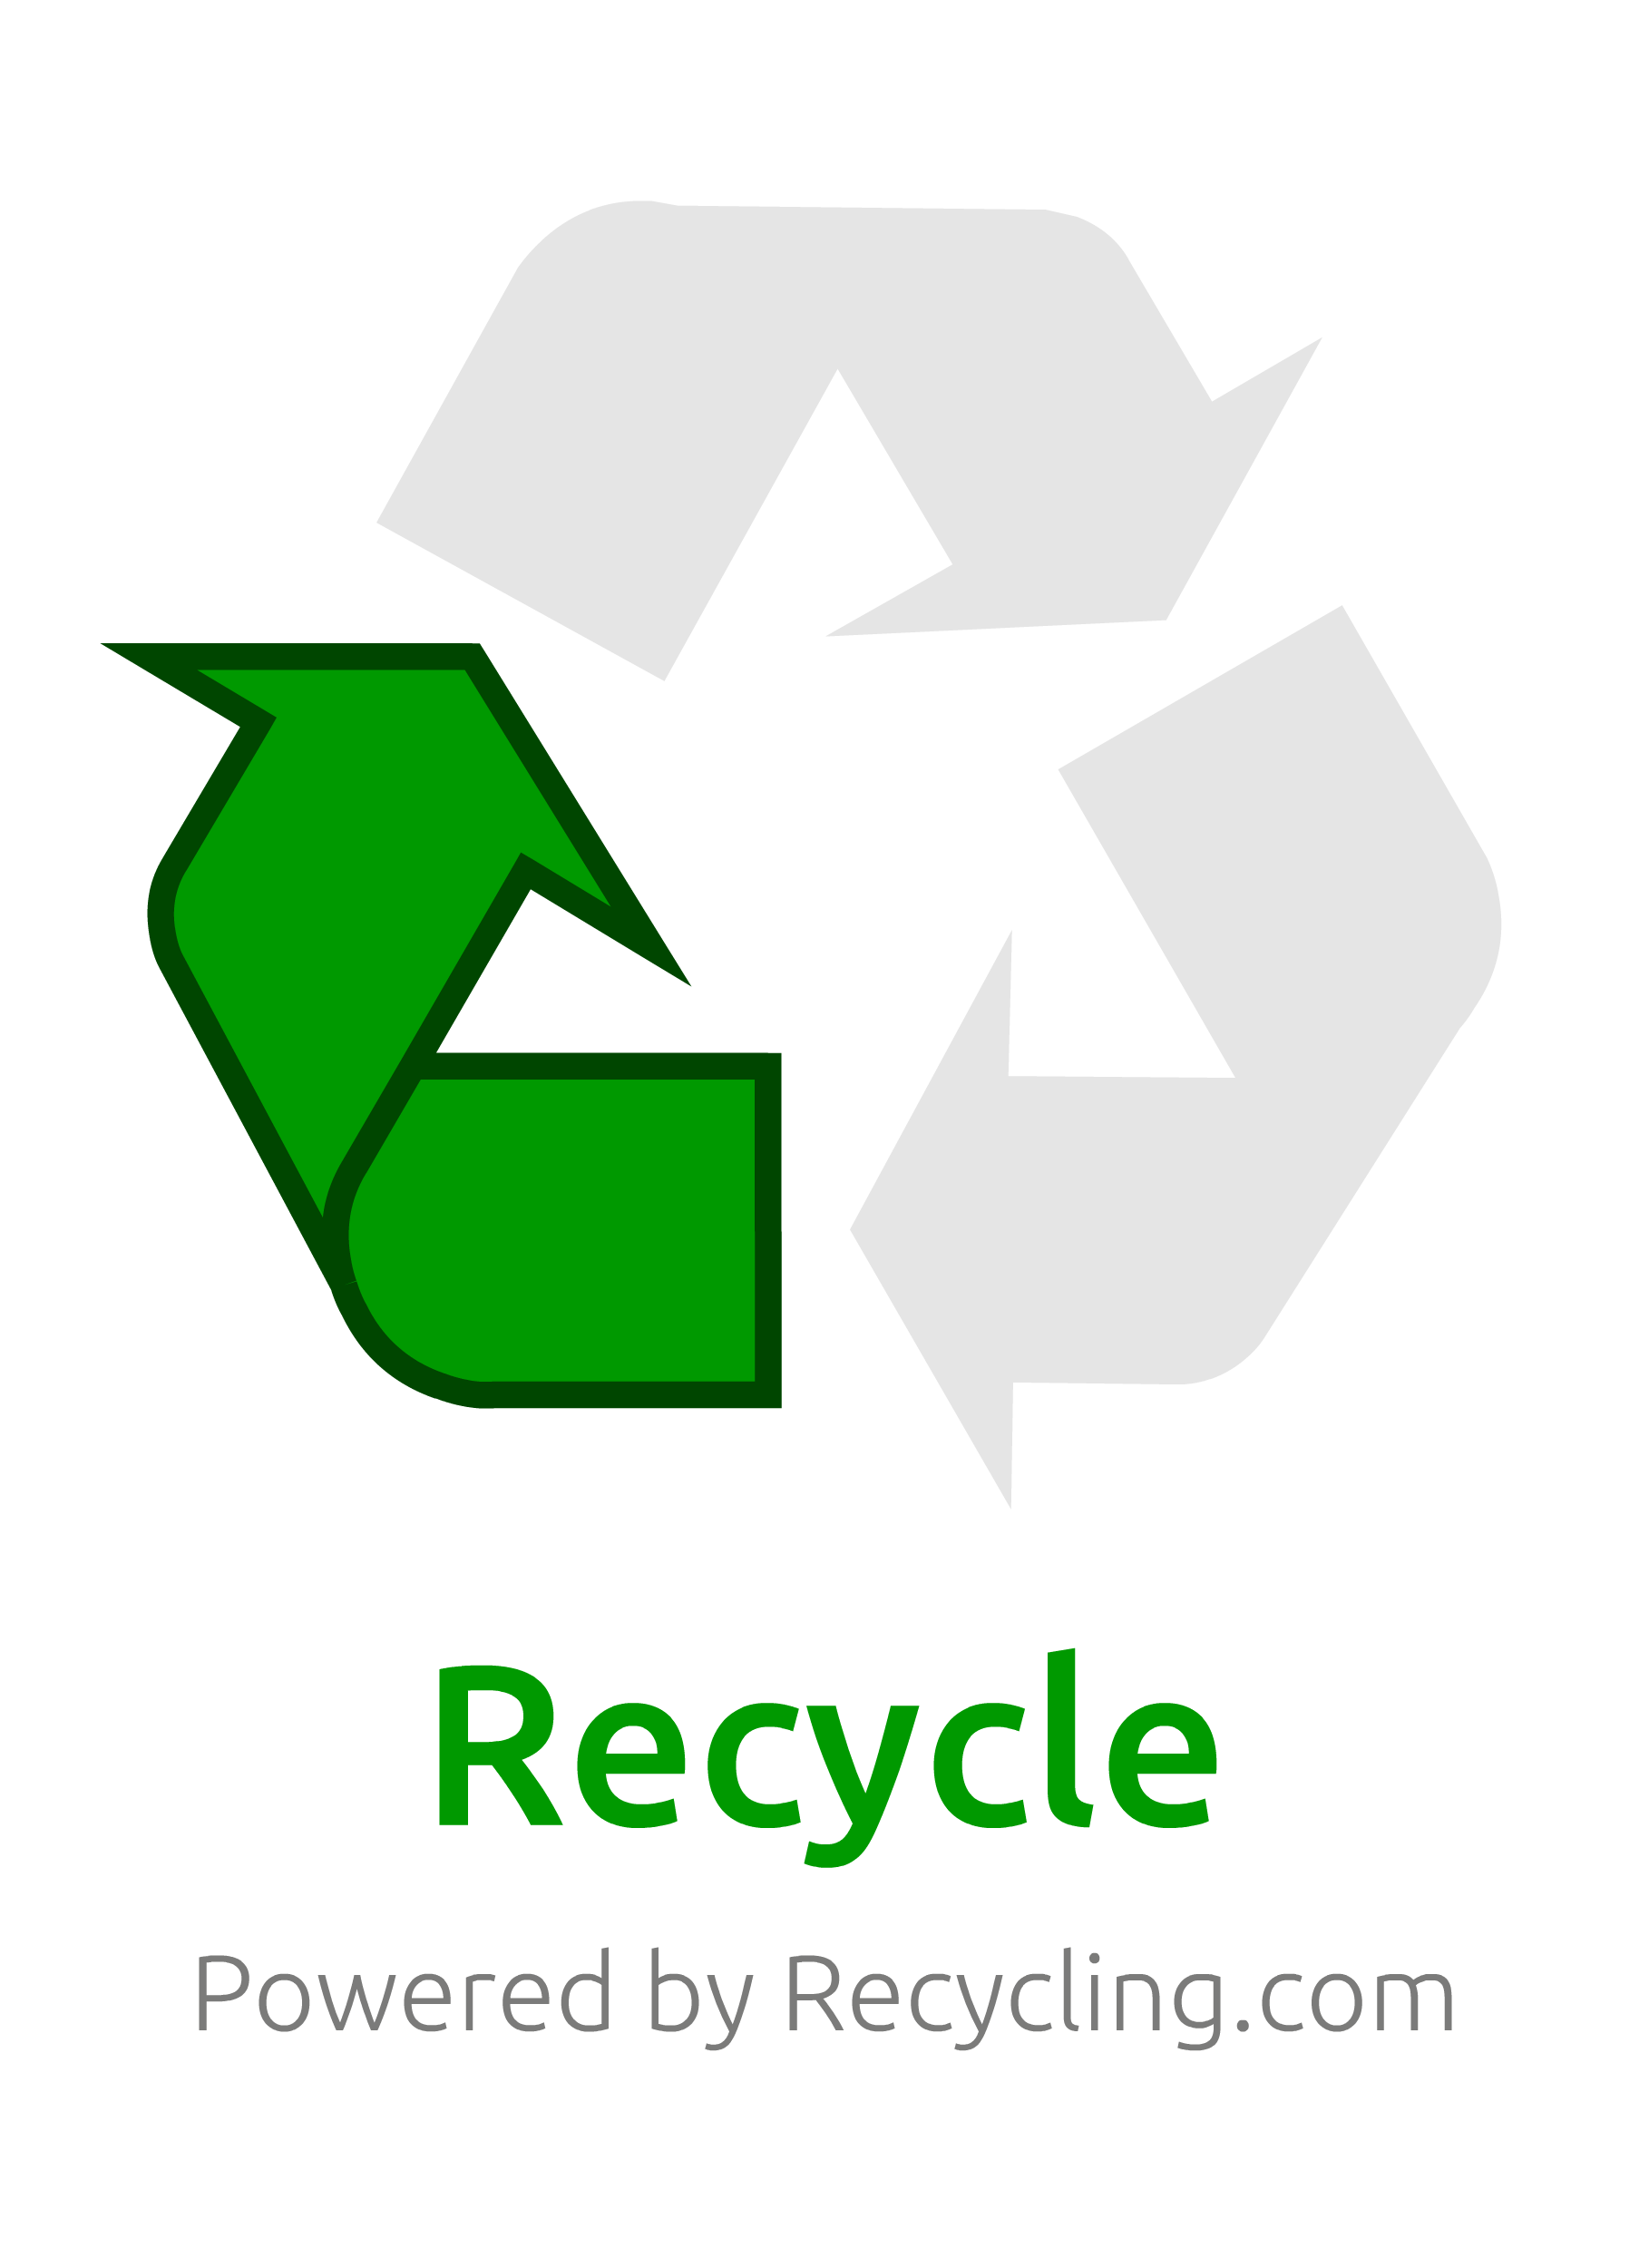 Reduce Logo - The Recycling Trilogy - Reduce, Reuse, Recycle | Download